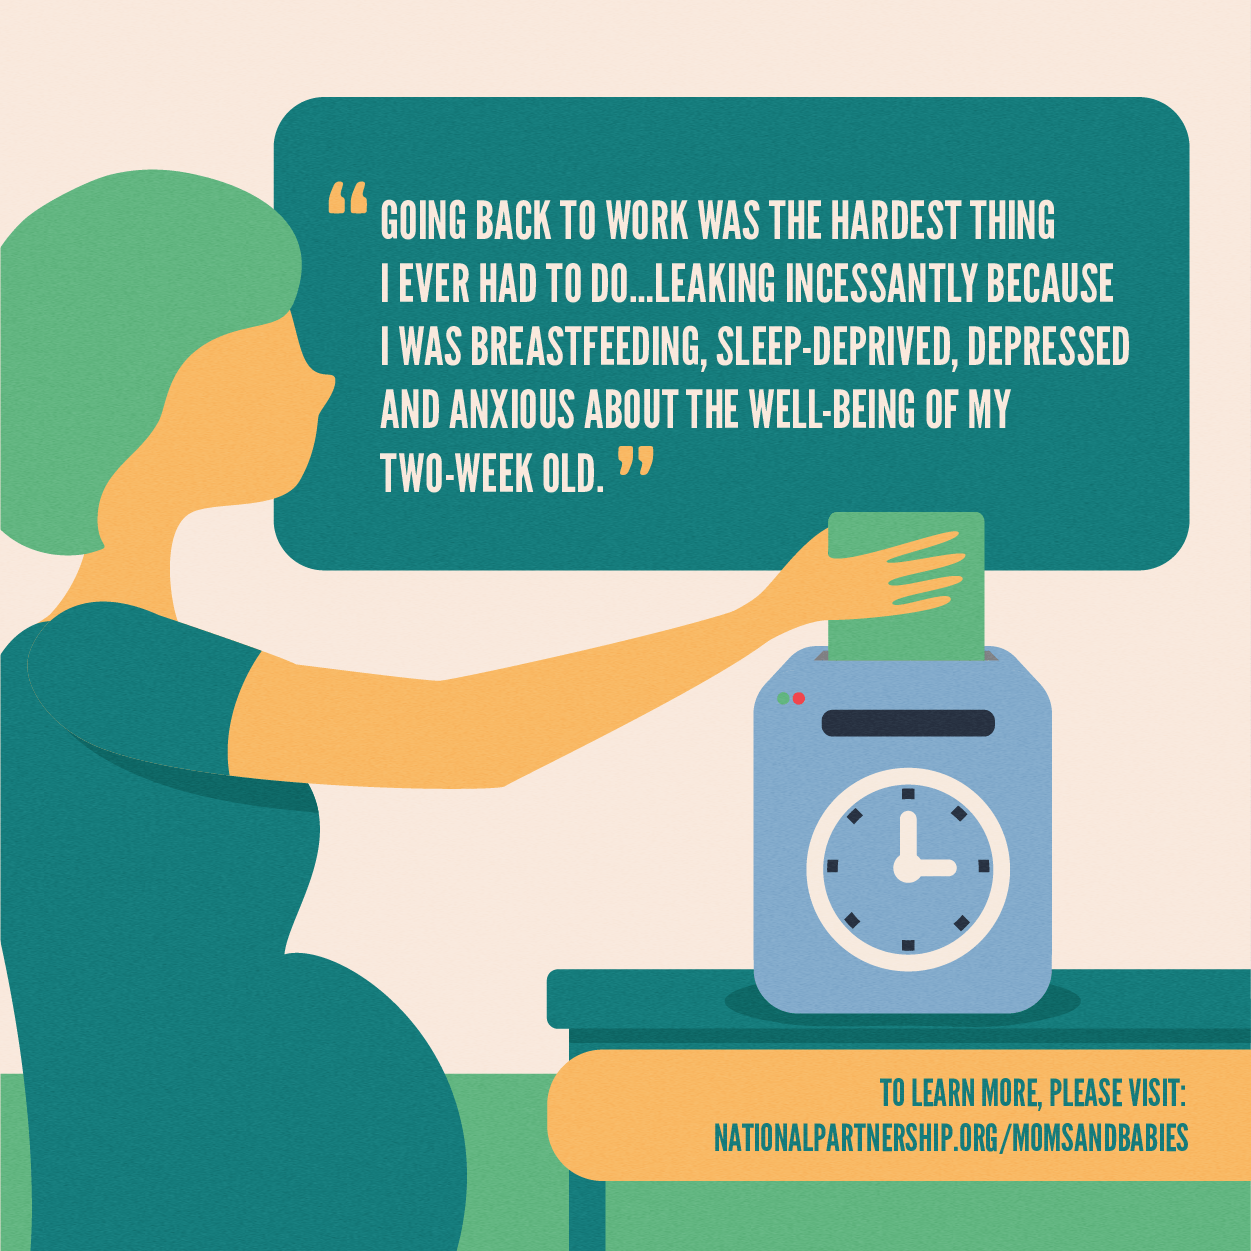 Illustration of a pregnant woman putting a card into a time clock system. Her speech bubble reads: Going back to work was the hardest thing I ever had to do...leaking incessantly because I was breastfeeding, sleep-deprived, depressed and anxious about the well-being of my two-week old.